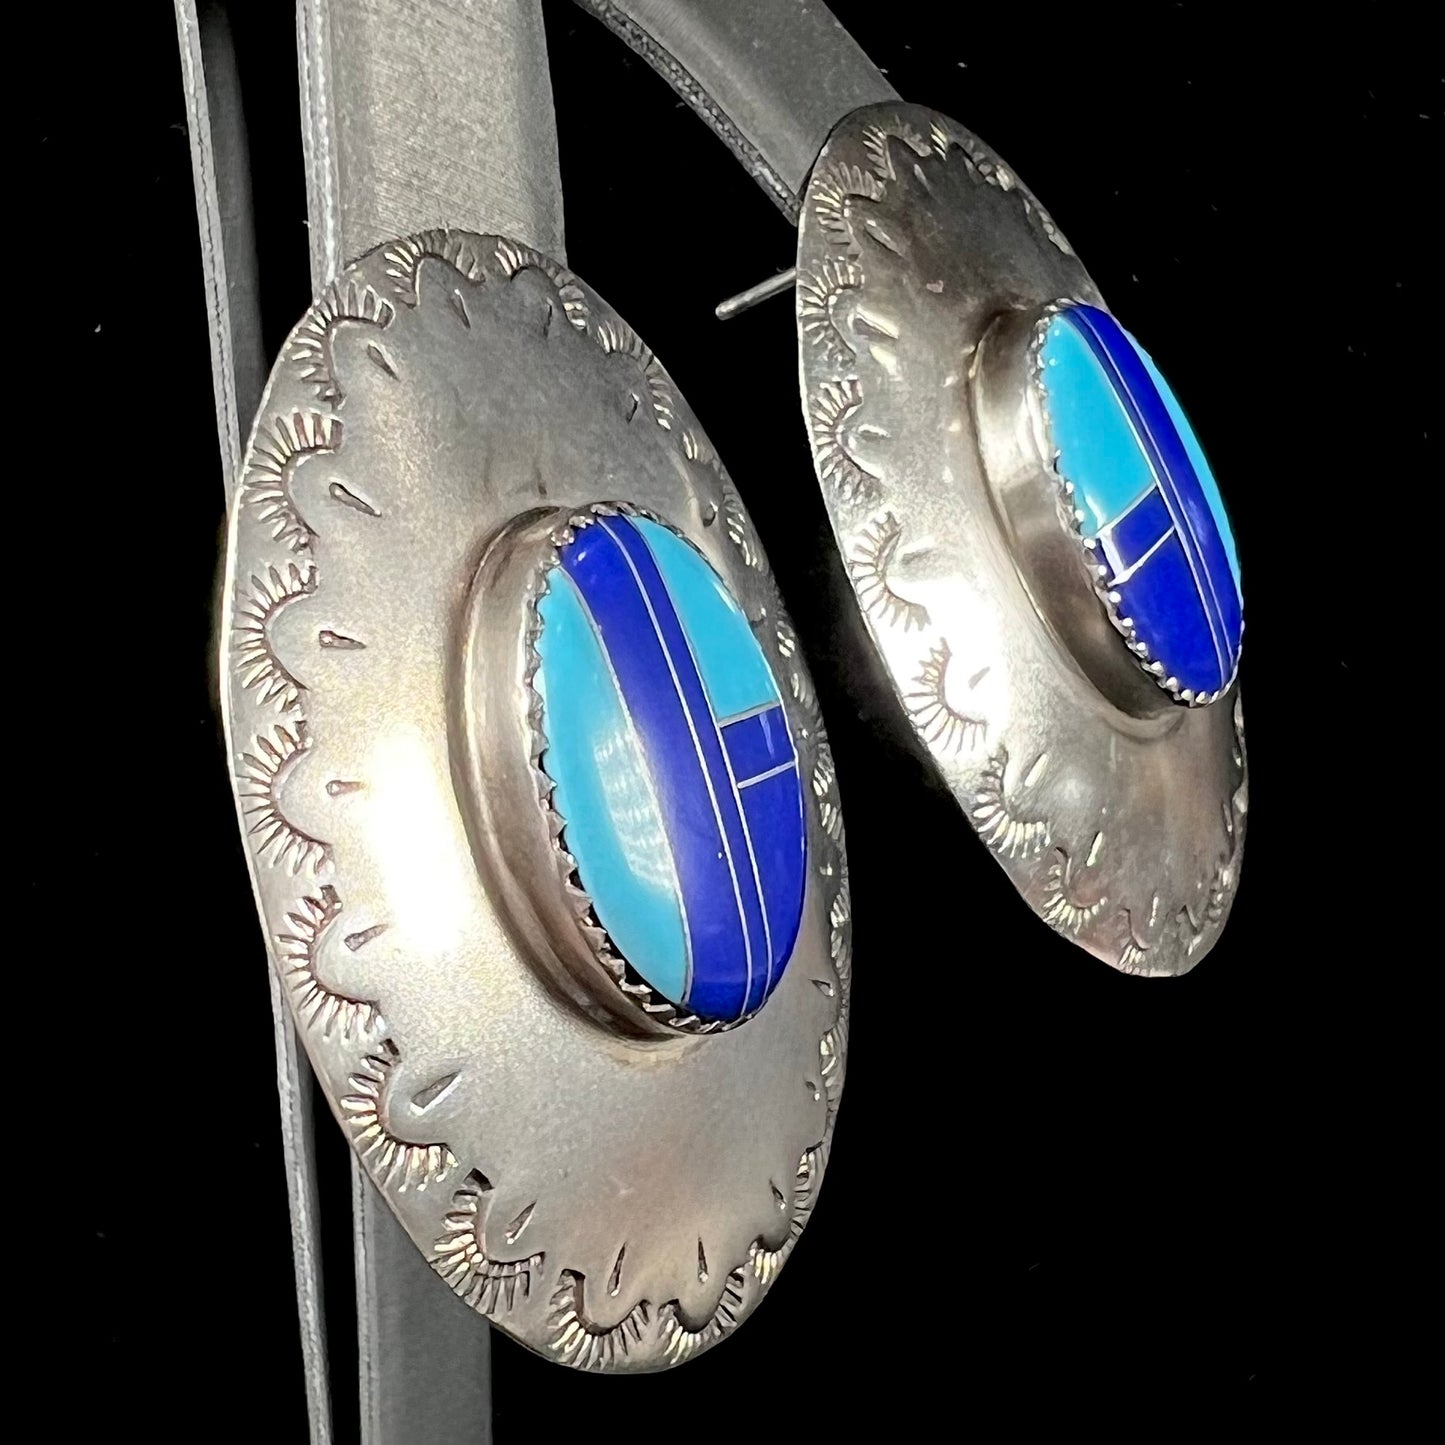 A pair of sterling silver concho earrings set with lapis lazuli and turquoise stone inlay.